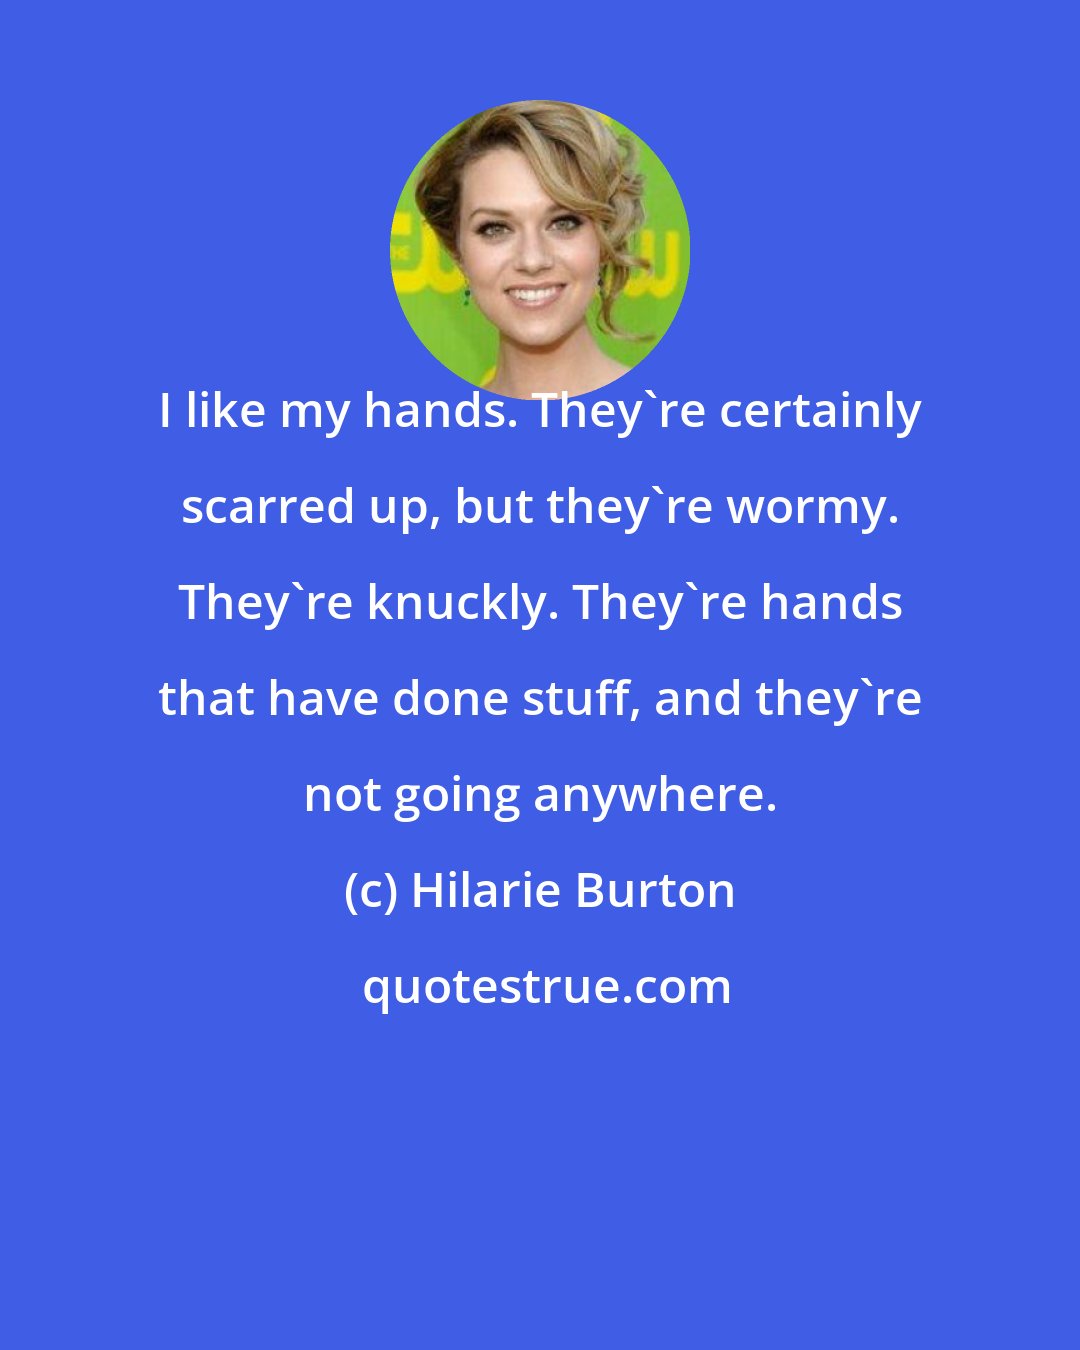 Hilarie Burton: I like my hands. They're certainly scarred up, but they're wormy. They're knuckly. They're hands that have done stuff, and they're not going anywhere.